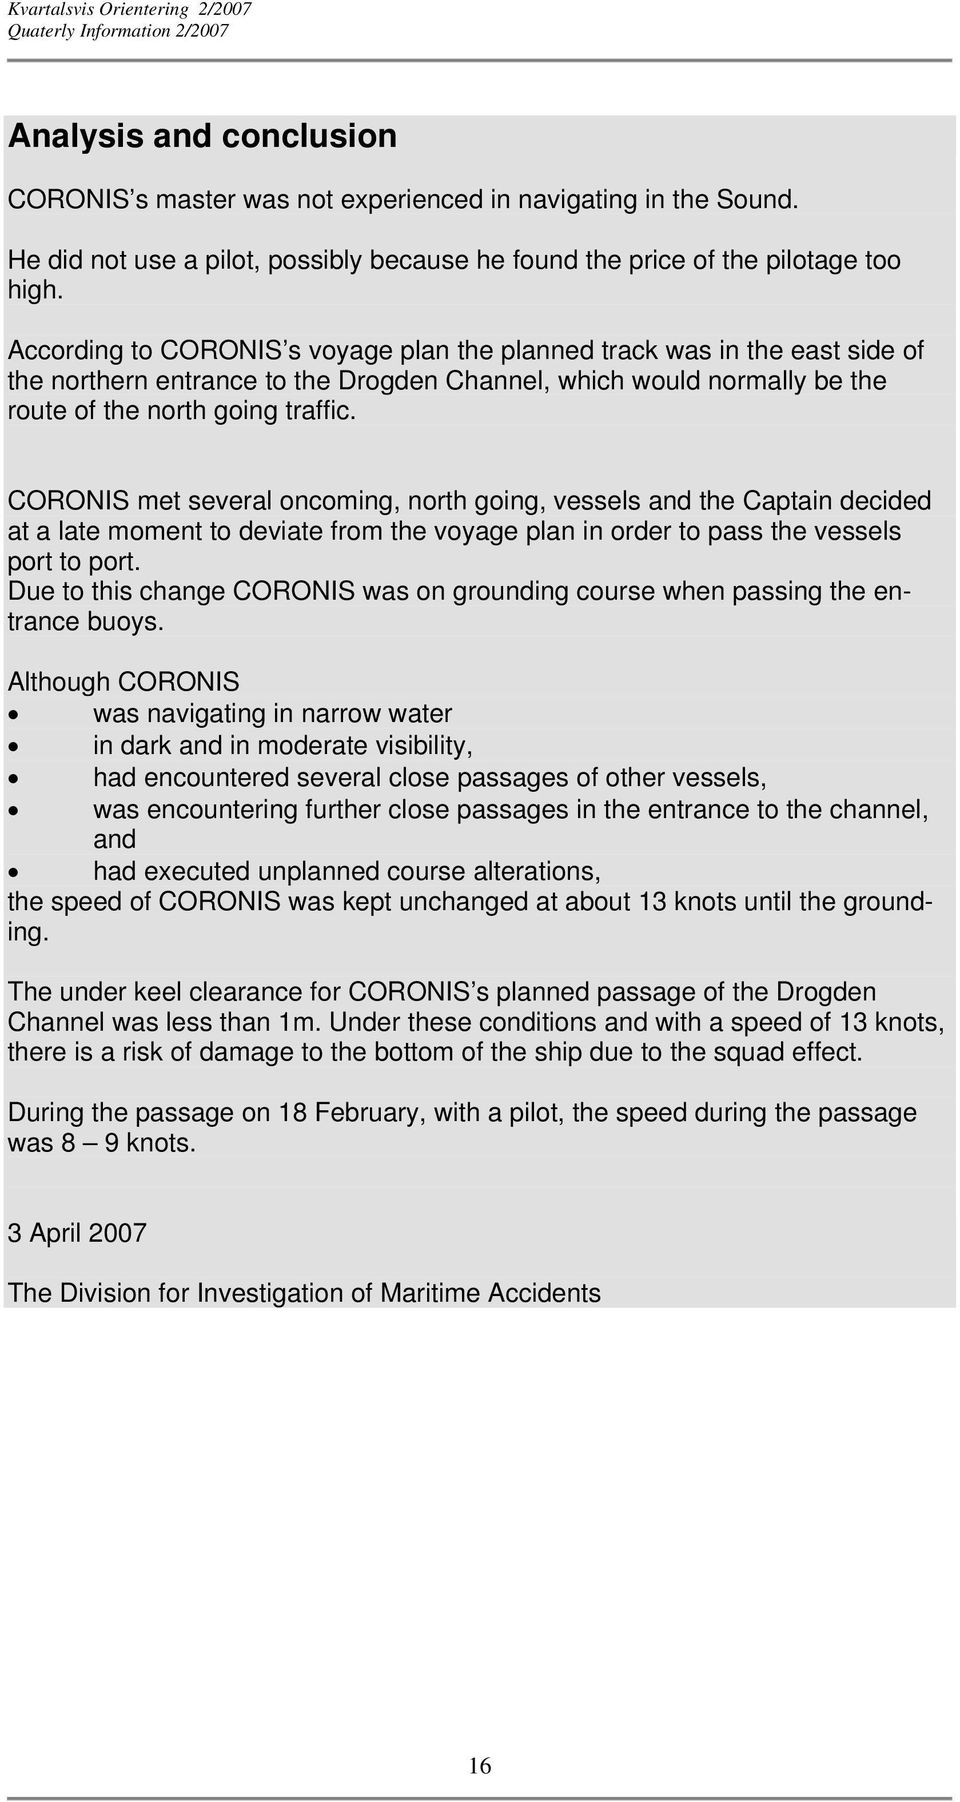 CORONIS met several oncoming, north going, vessels and the Captain decided at a late moment to deviate from the voyage plan in order to pass the vessels port to port.